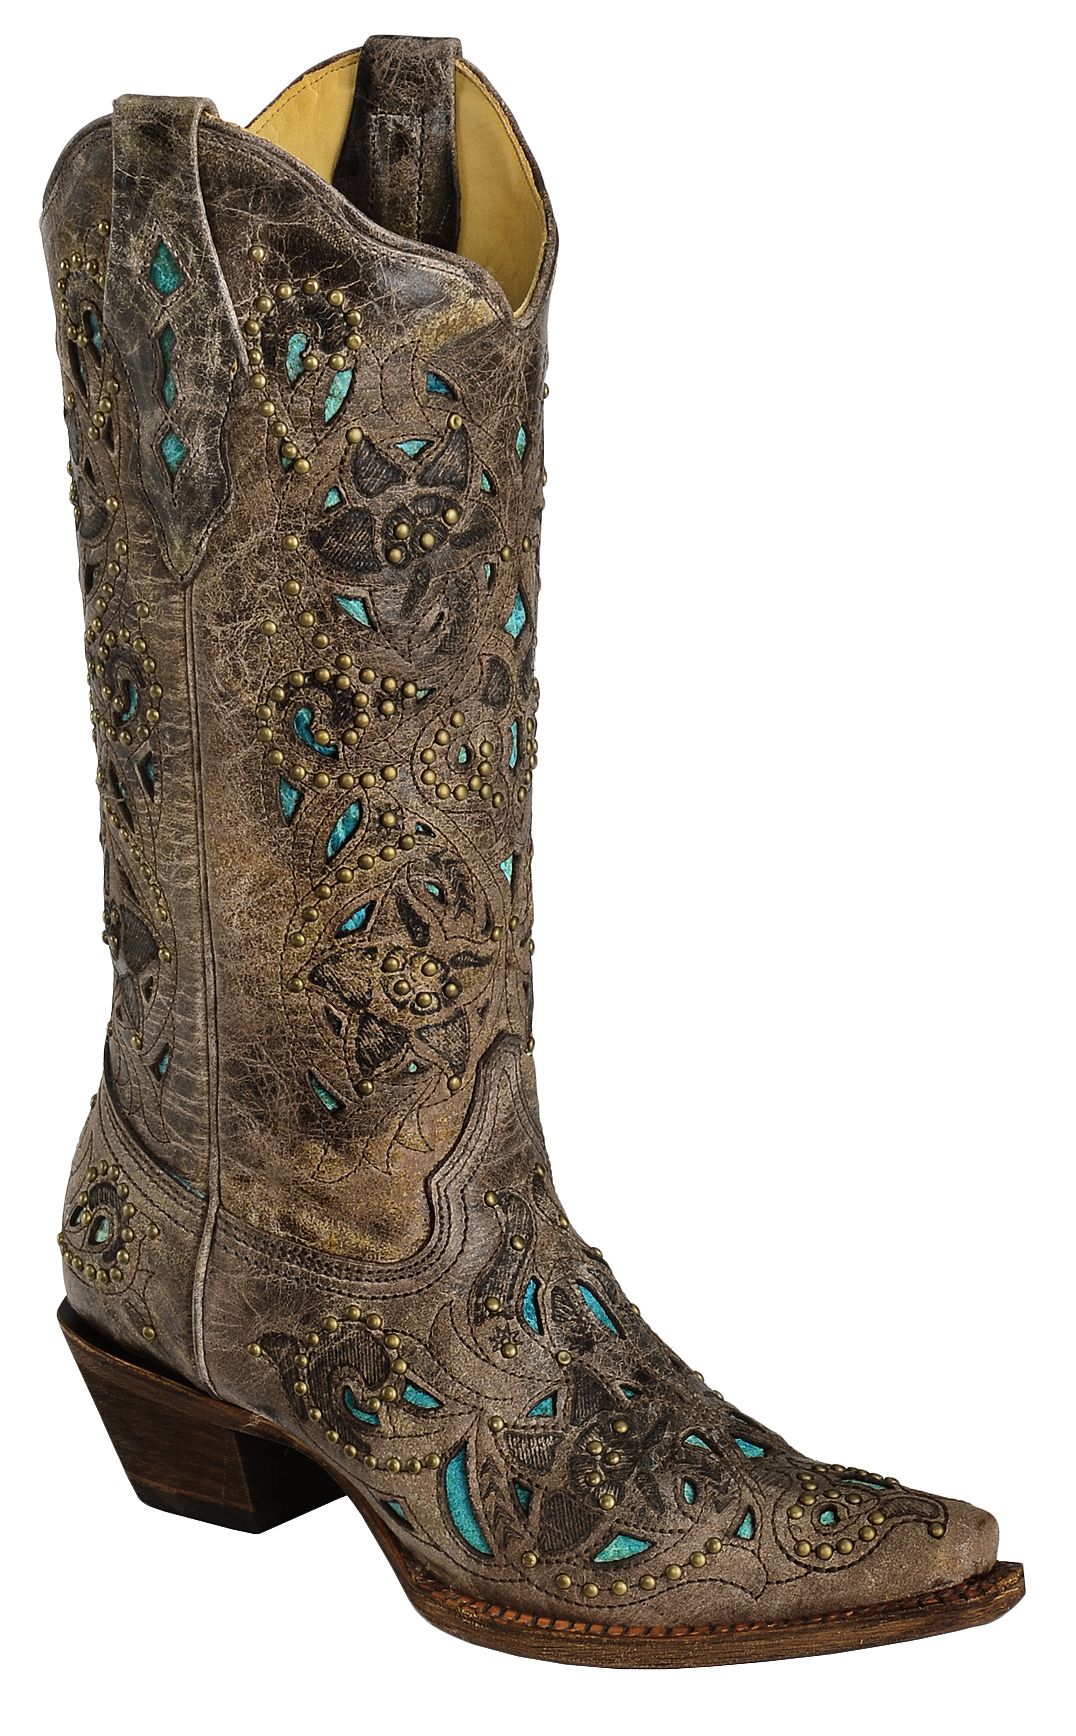 Corral Studded Turquoise Leather Inlay Cowgirl Boots - Snip Toe | Sheplers